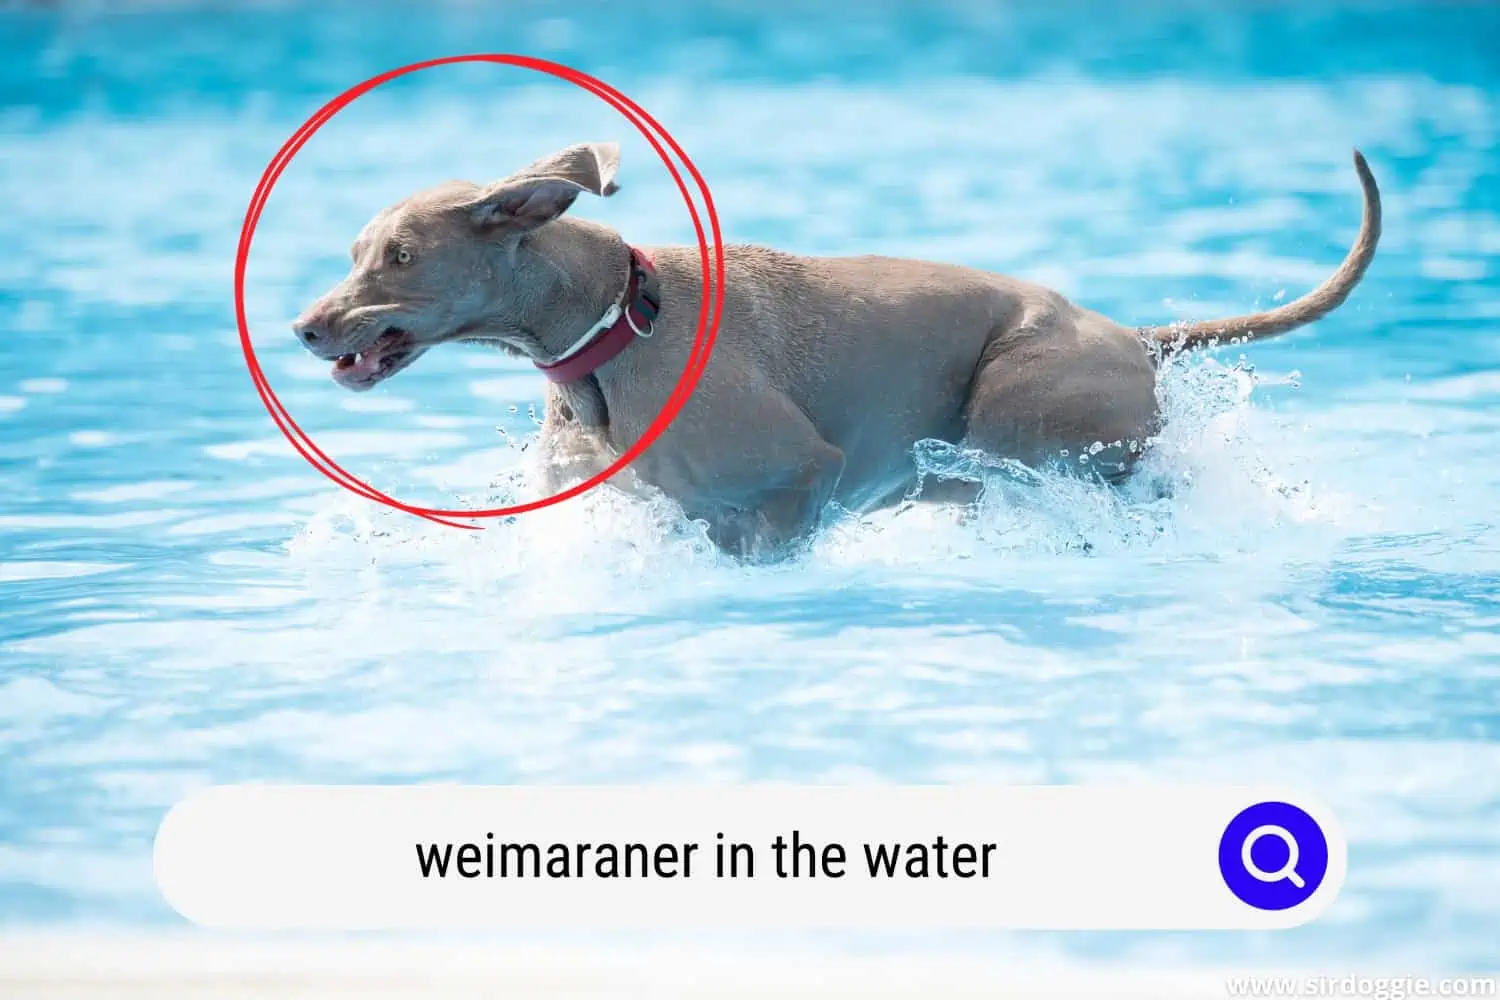 Weimaraner dog swimming in the pool